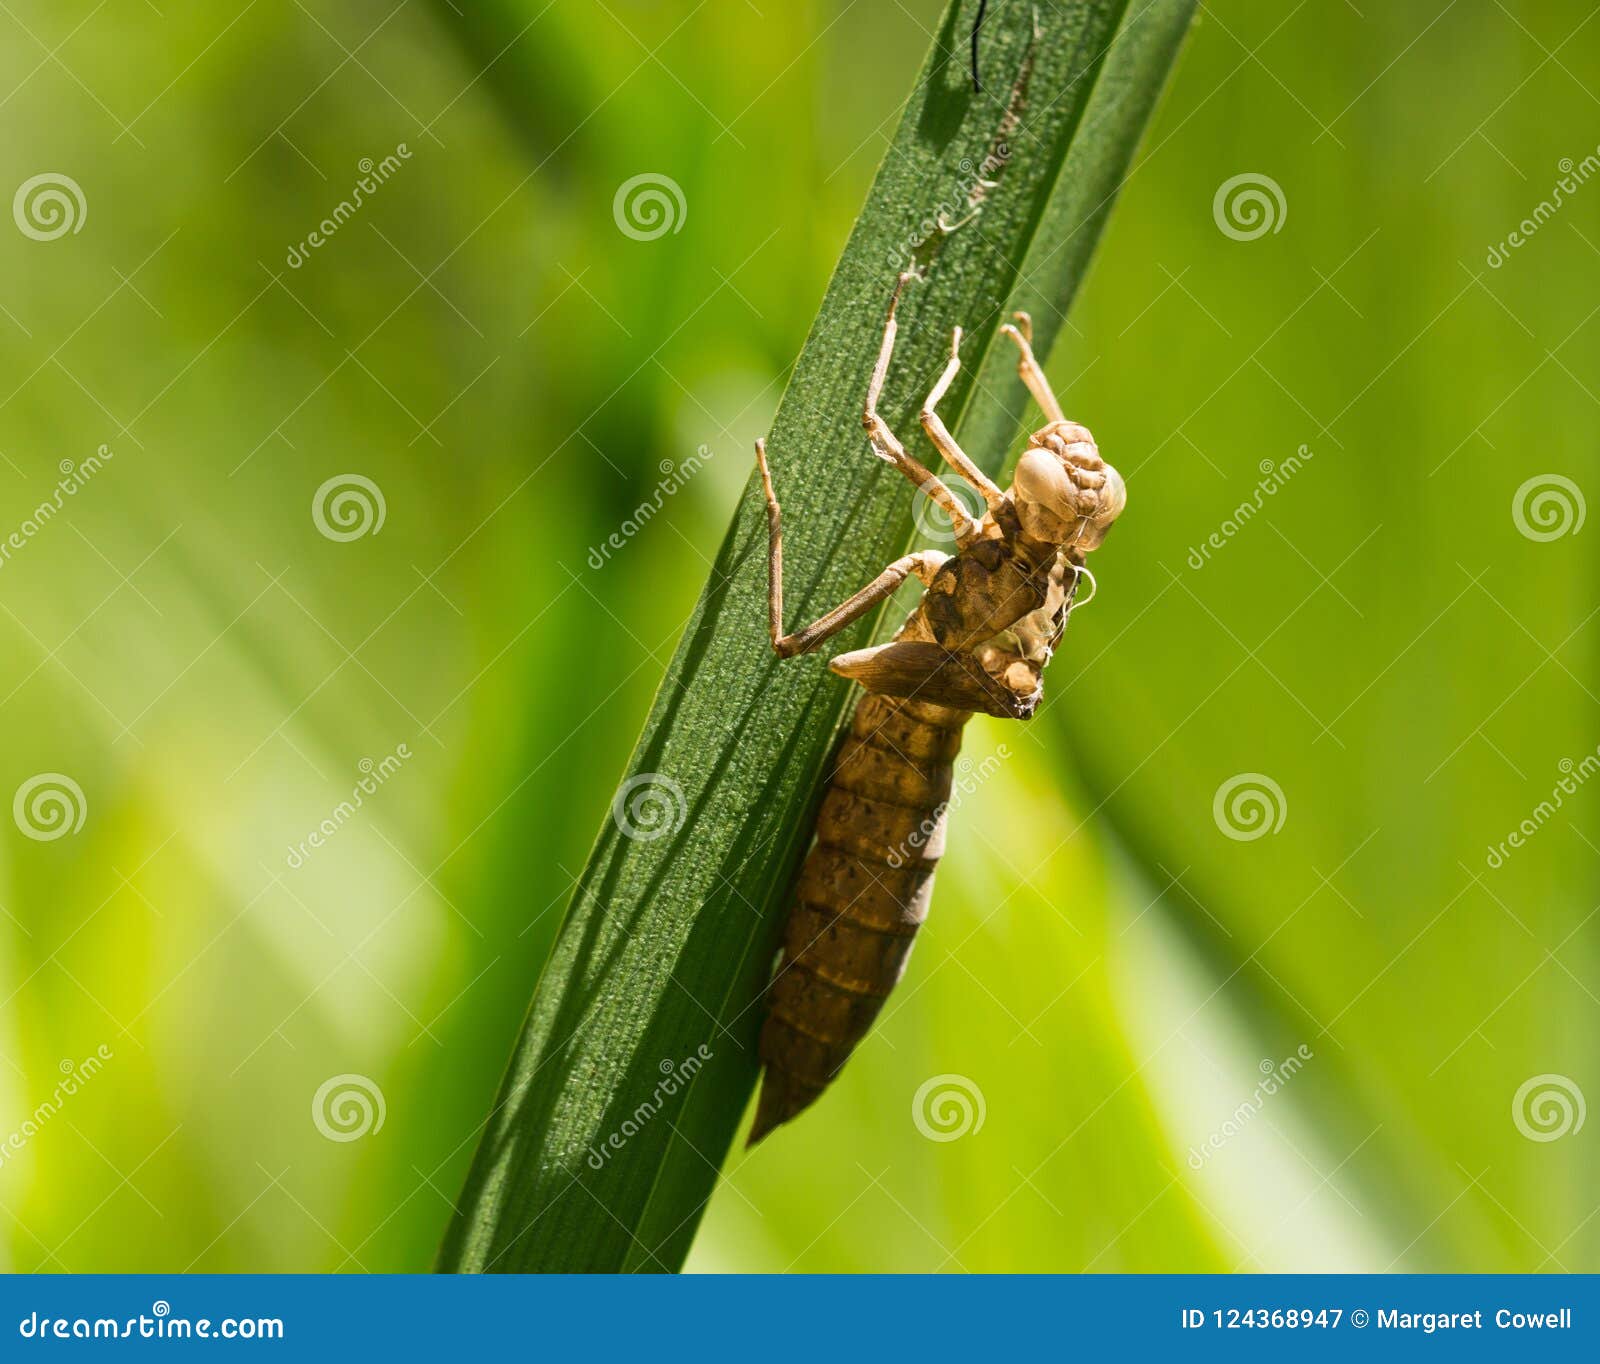 do dragonfly larvae live in water